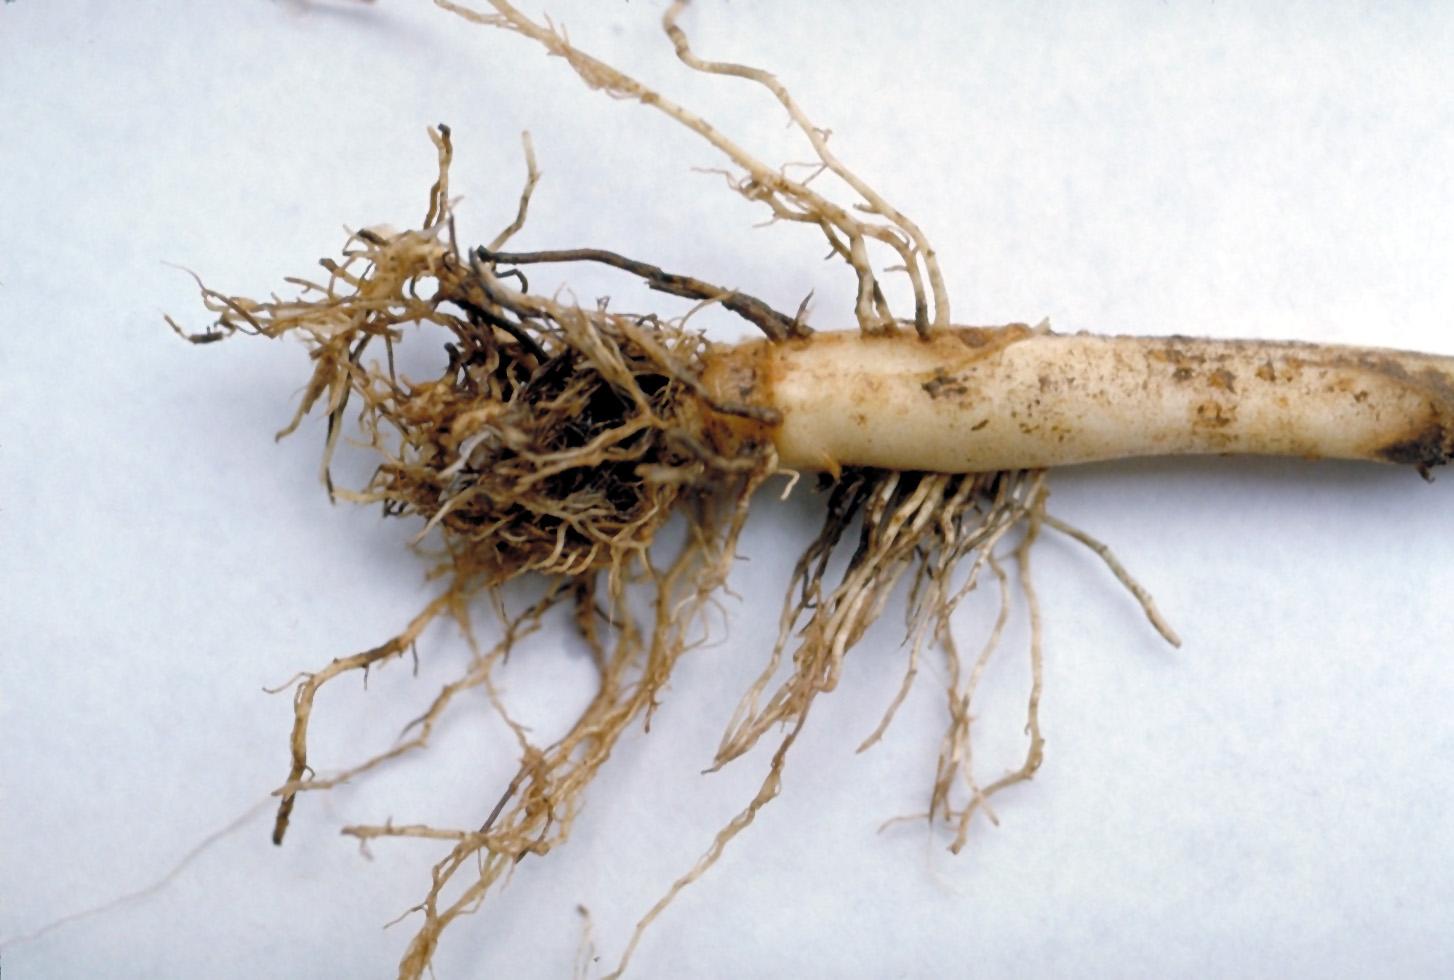 The tell-tale symptoms of black root rot are the black lesions that develop on roots.  These black lesions are in sharp contrast to the white color of healthy roots.  (Photo: Cheryl Kaiser, UK)